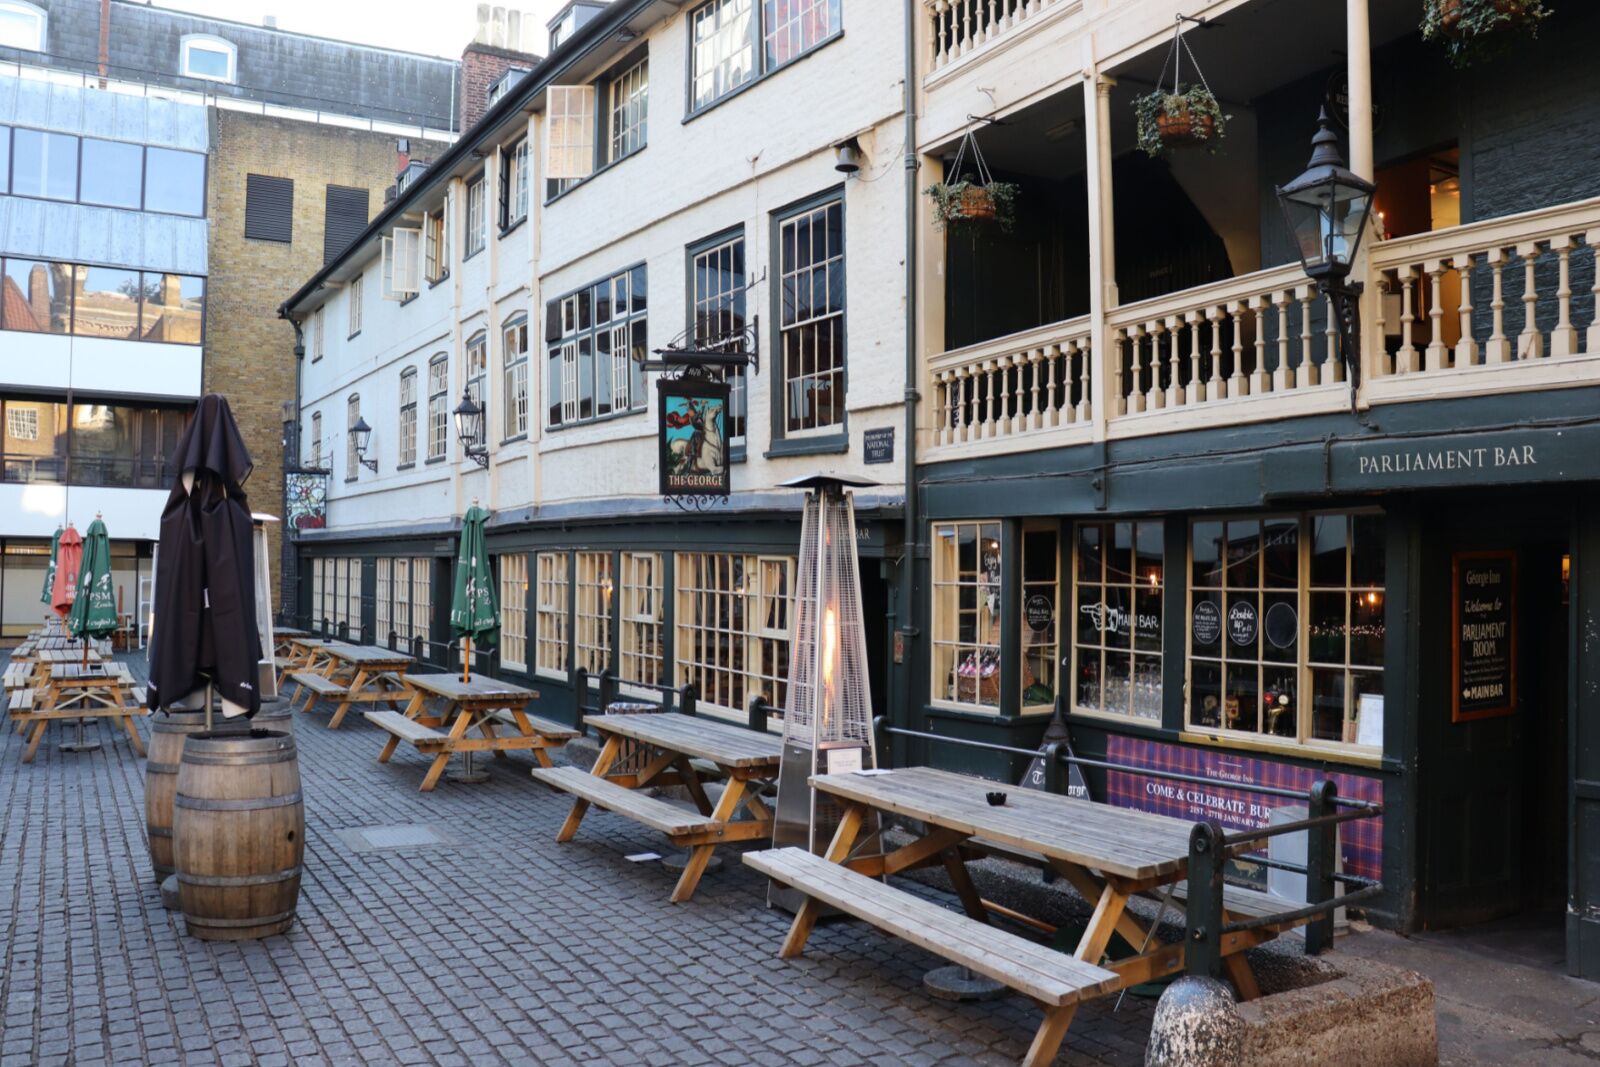 George Inn London with benches in the front